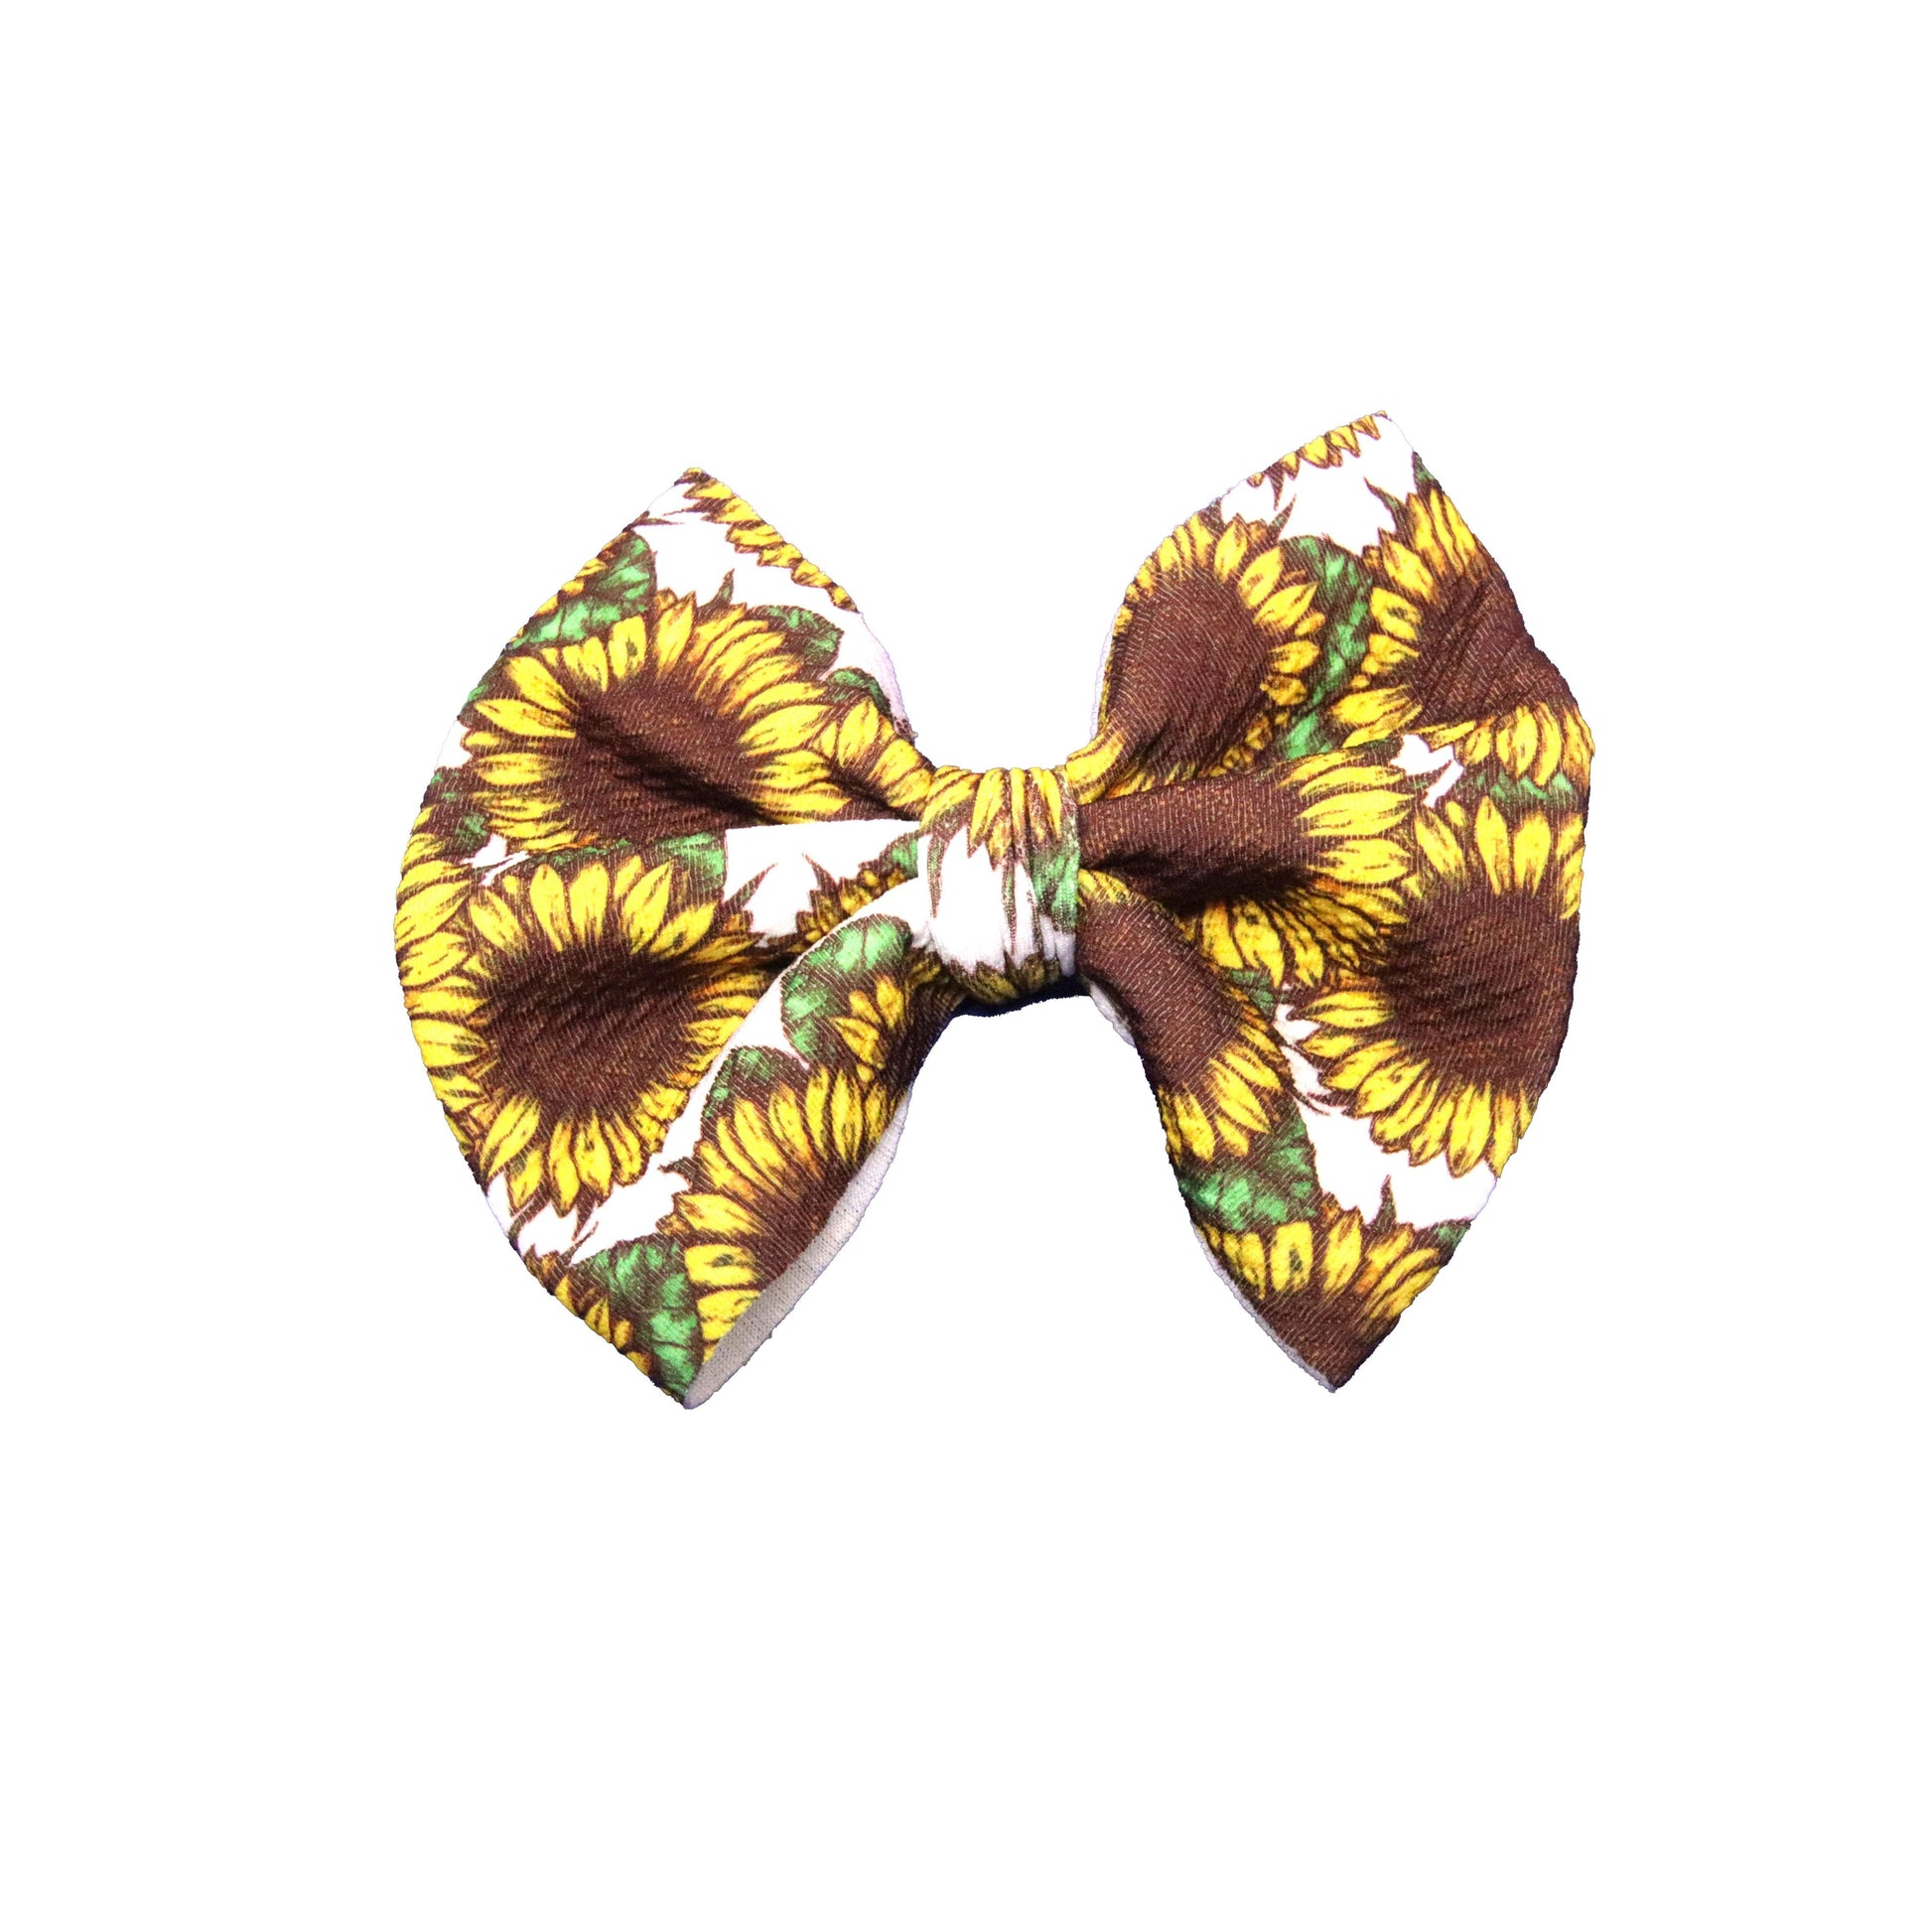 5", Bow, Hair Bow, Sunflowers, Fabric Bow, New Product - 04OCT2020